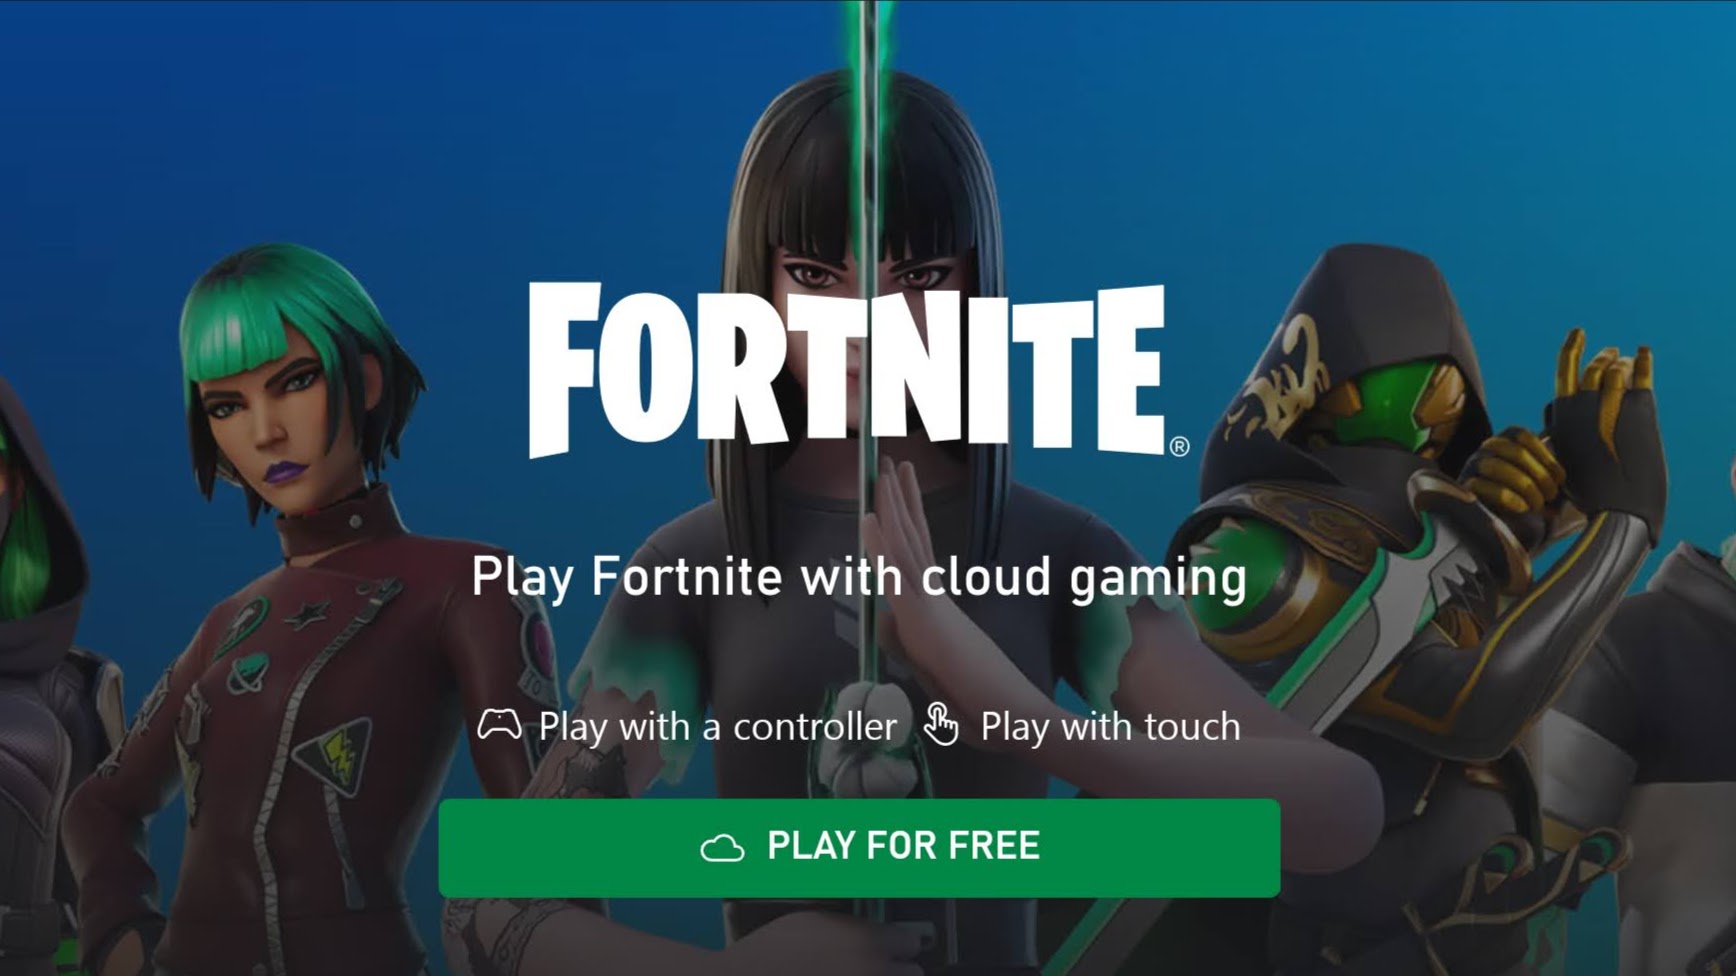 A screenshot of a Fortnite home screen with a button below it that says 